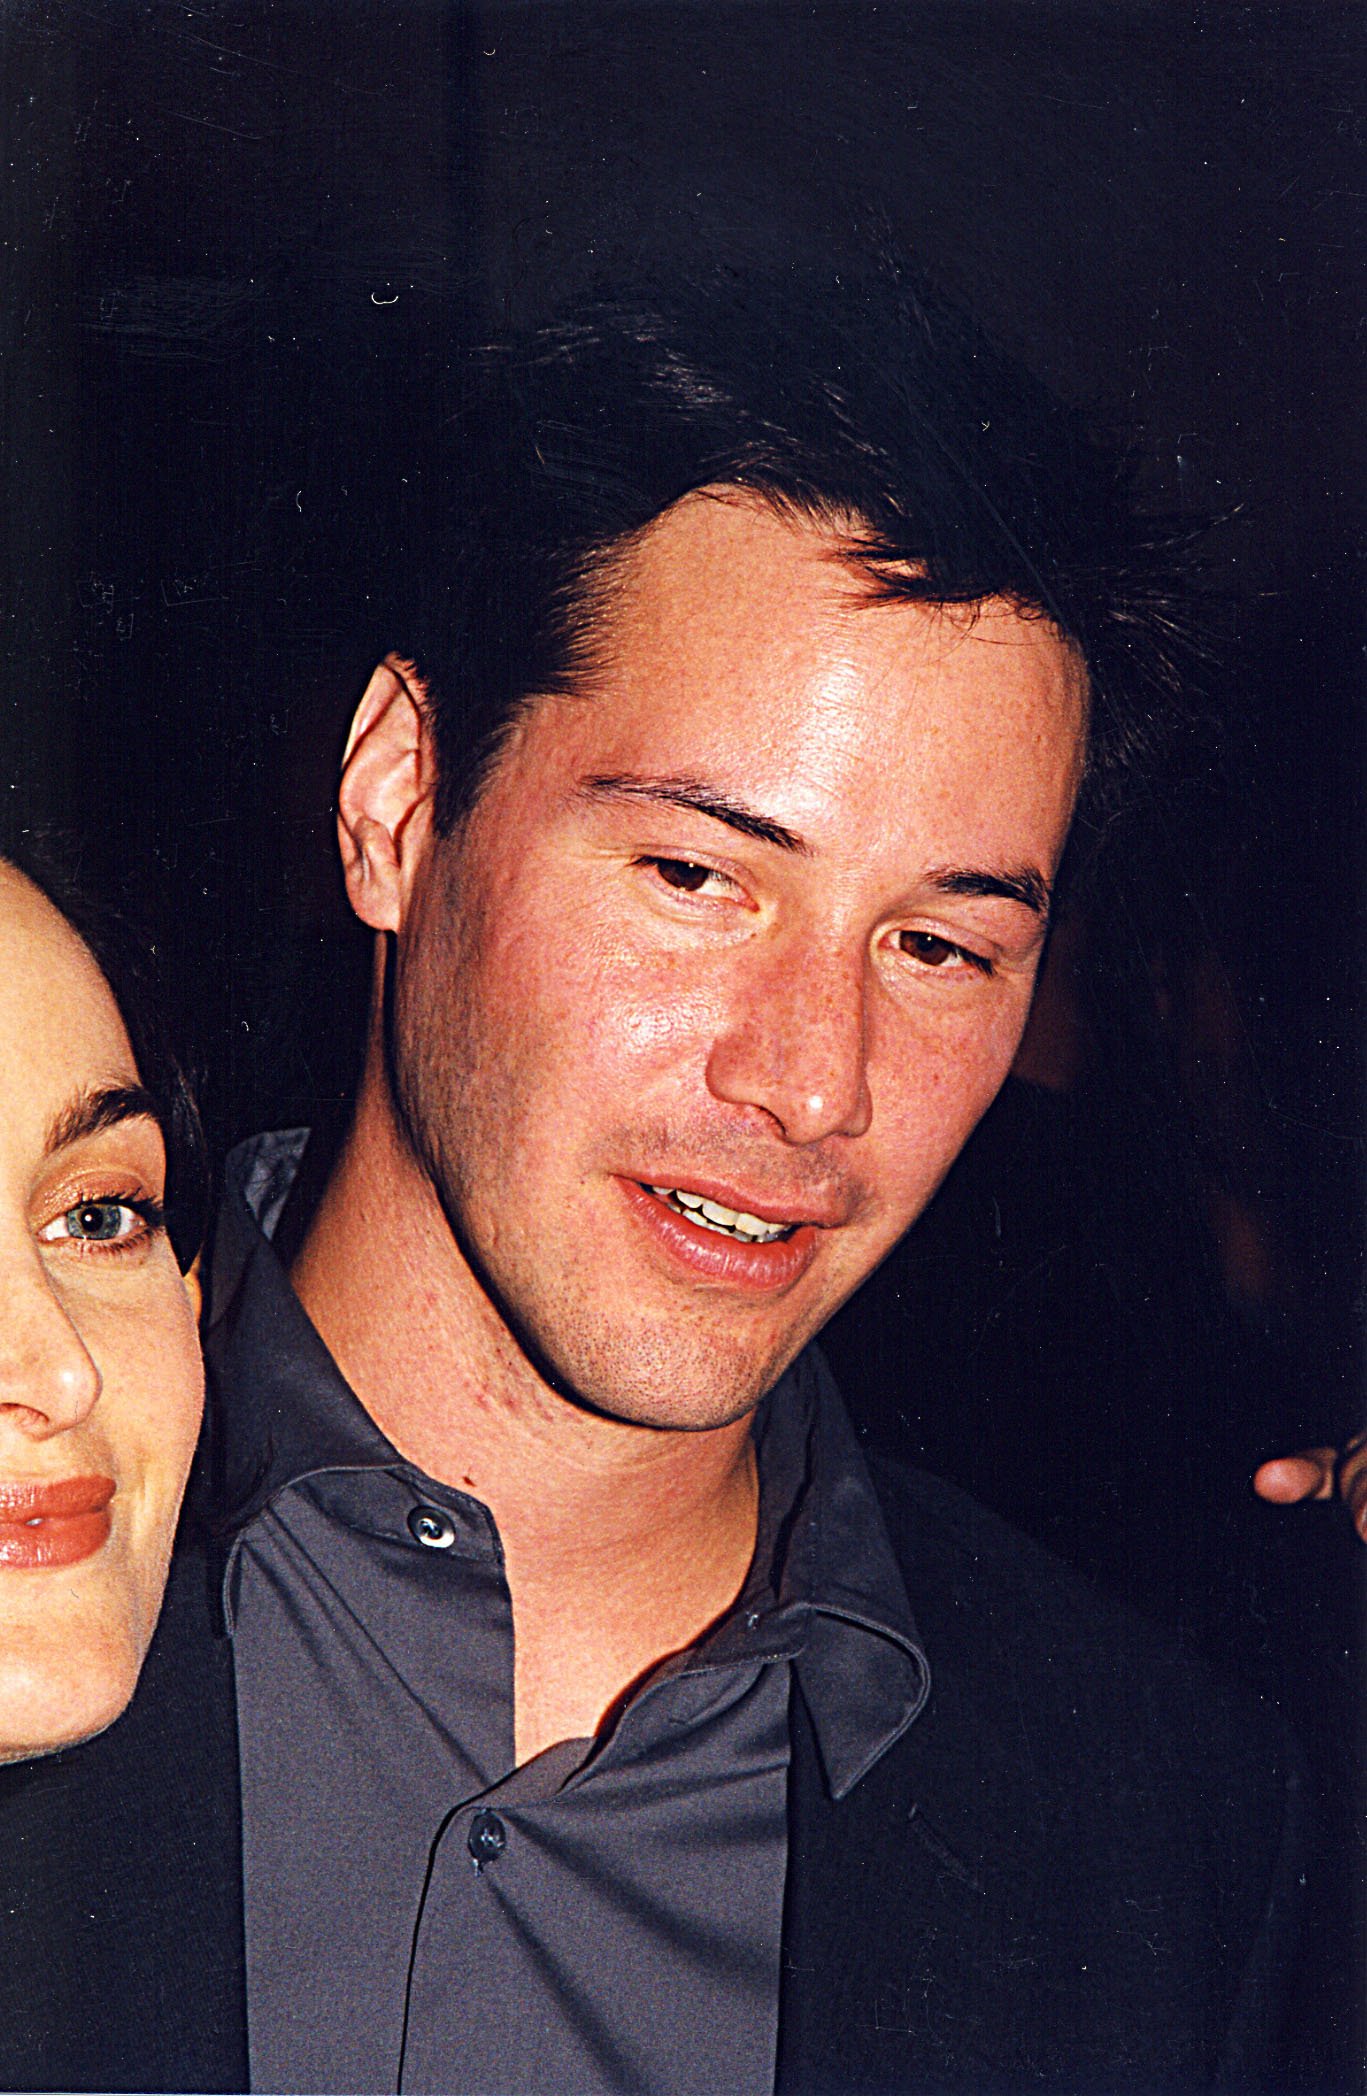 Keanu Reeves beim Showest '98 in Las Vegas, Nevada | Quelle: Getty Images